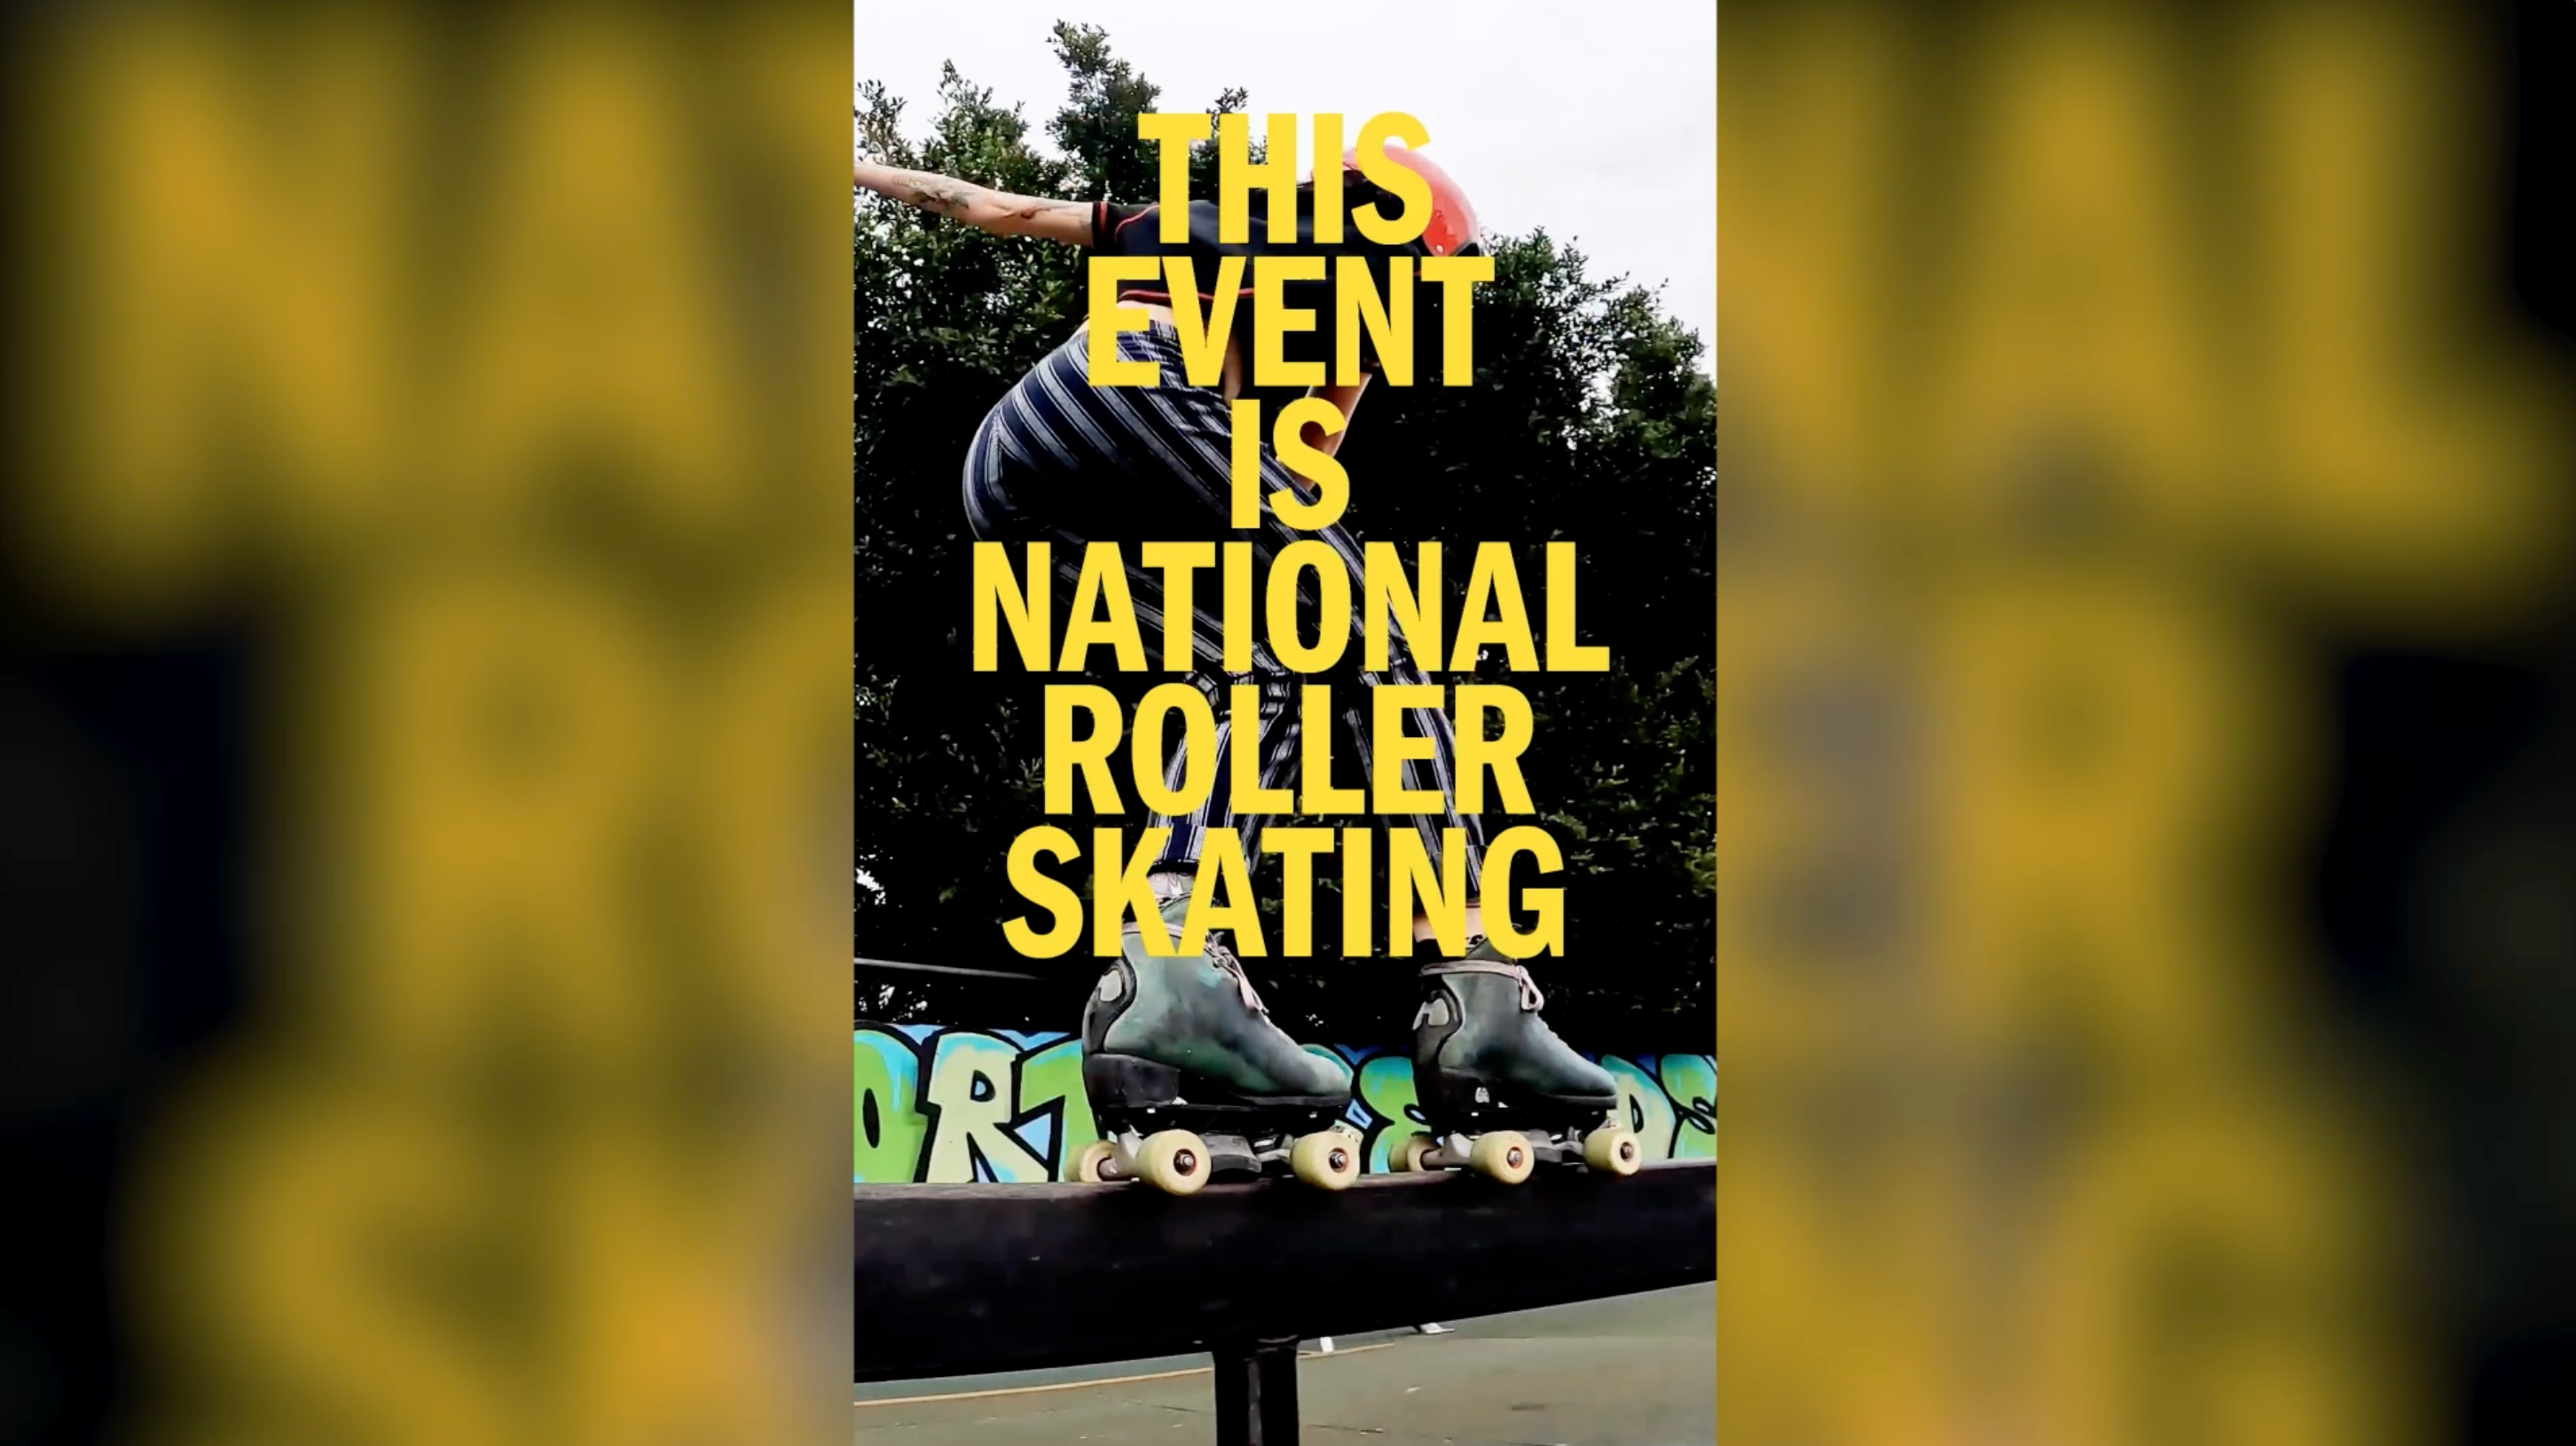 This Even is National Roller Skating Month text over image